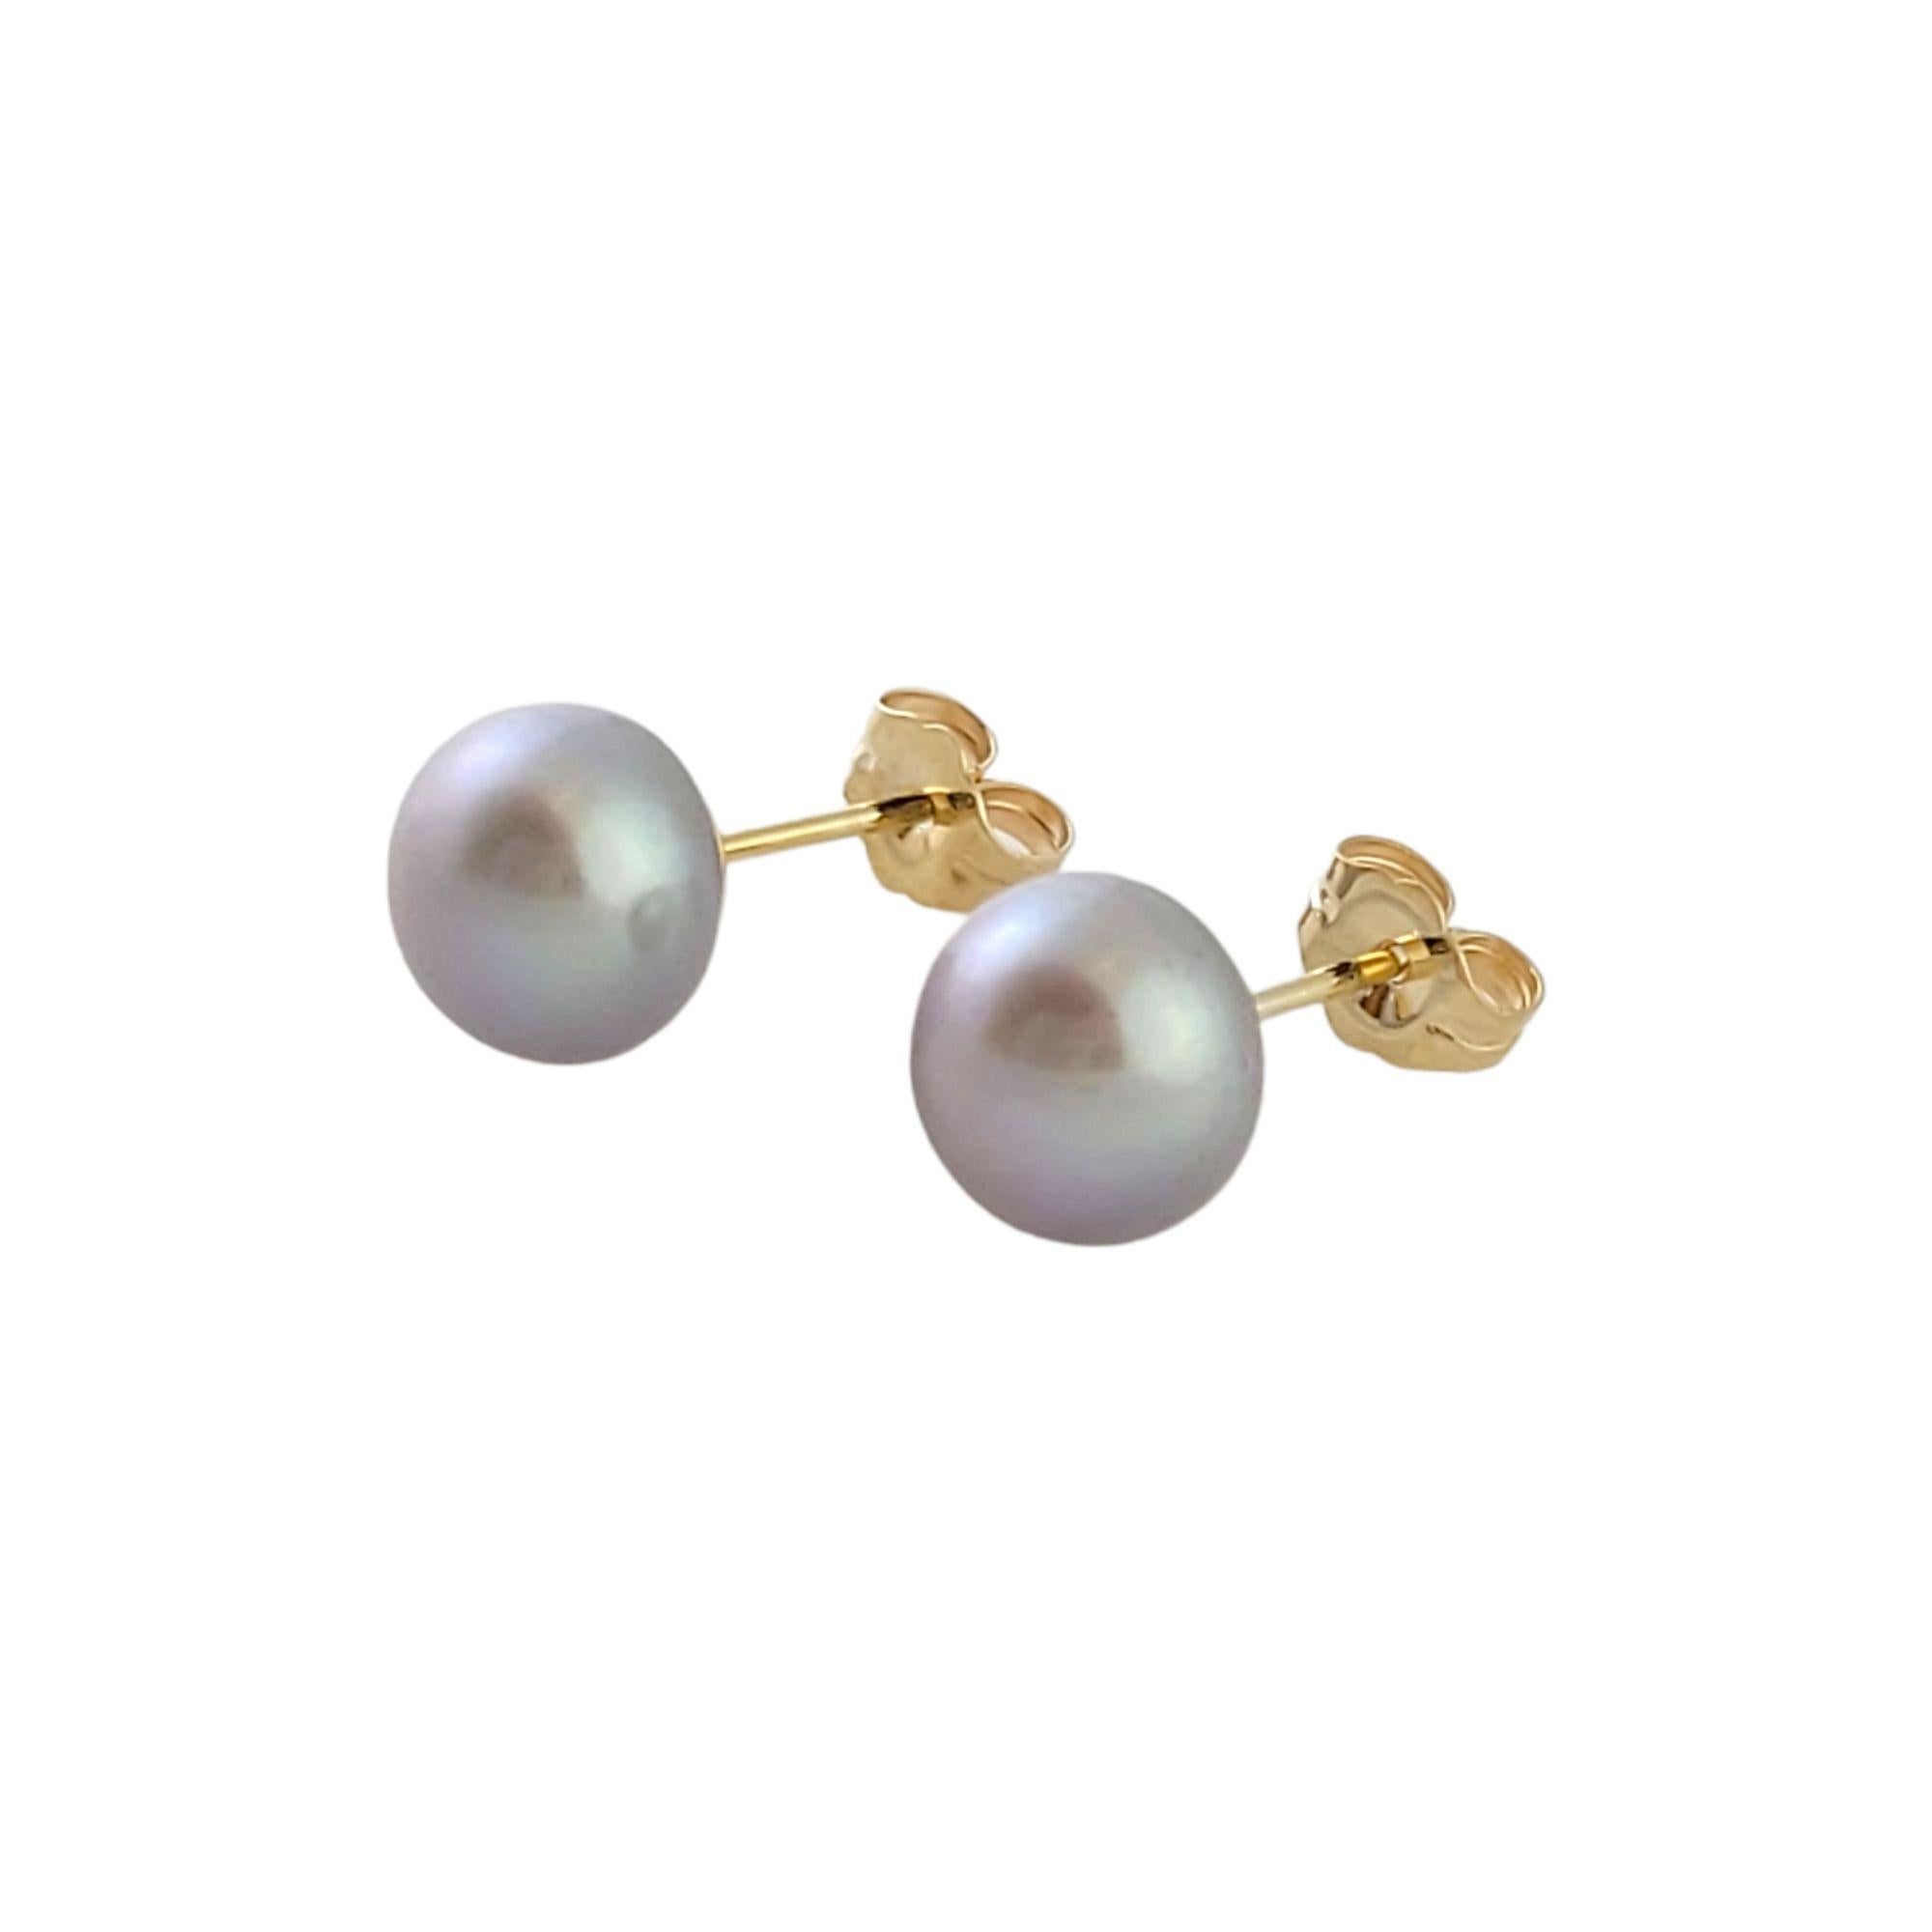 Gorgeous pair of freshwater black pearl studs on 14K yellow gold posts and backs!

Pearl size: 8.28mm each

Weight: 1.8 g/ 1.1 dwt

Hallmark: 14K

Very good condition, professionally polished.

Will come packaged in a gift box or pouch (when